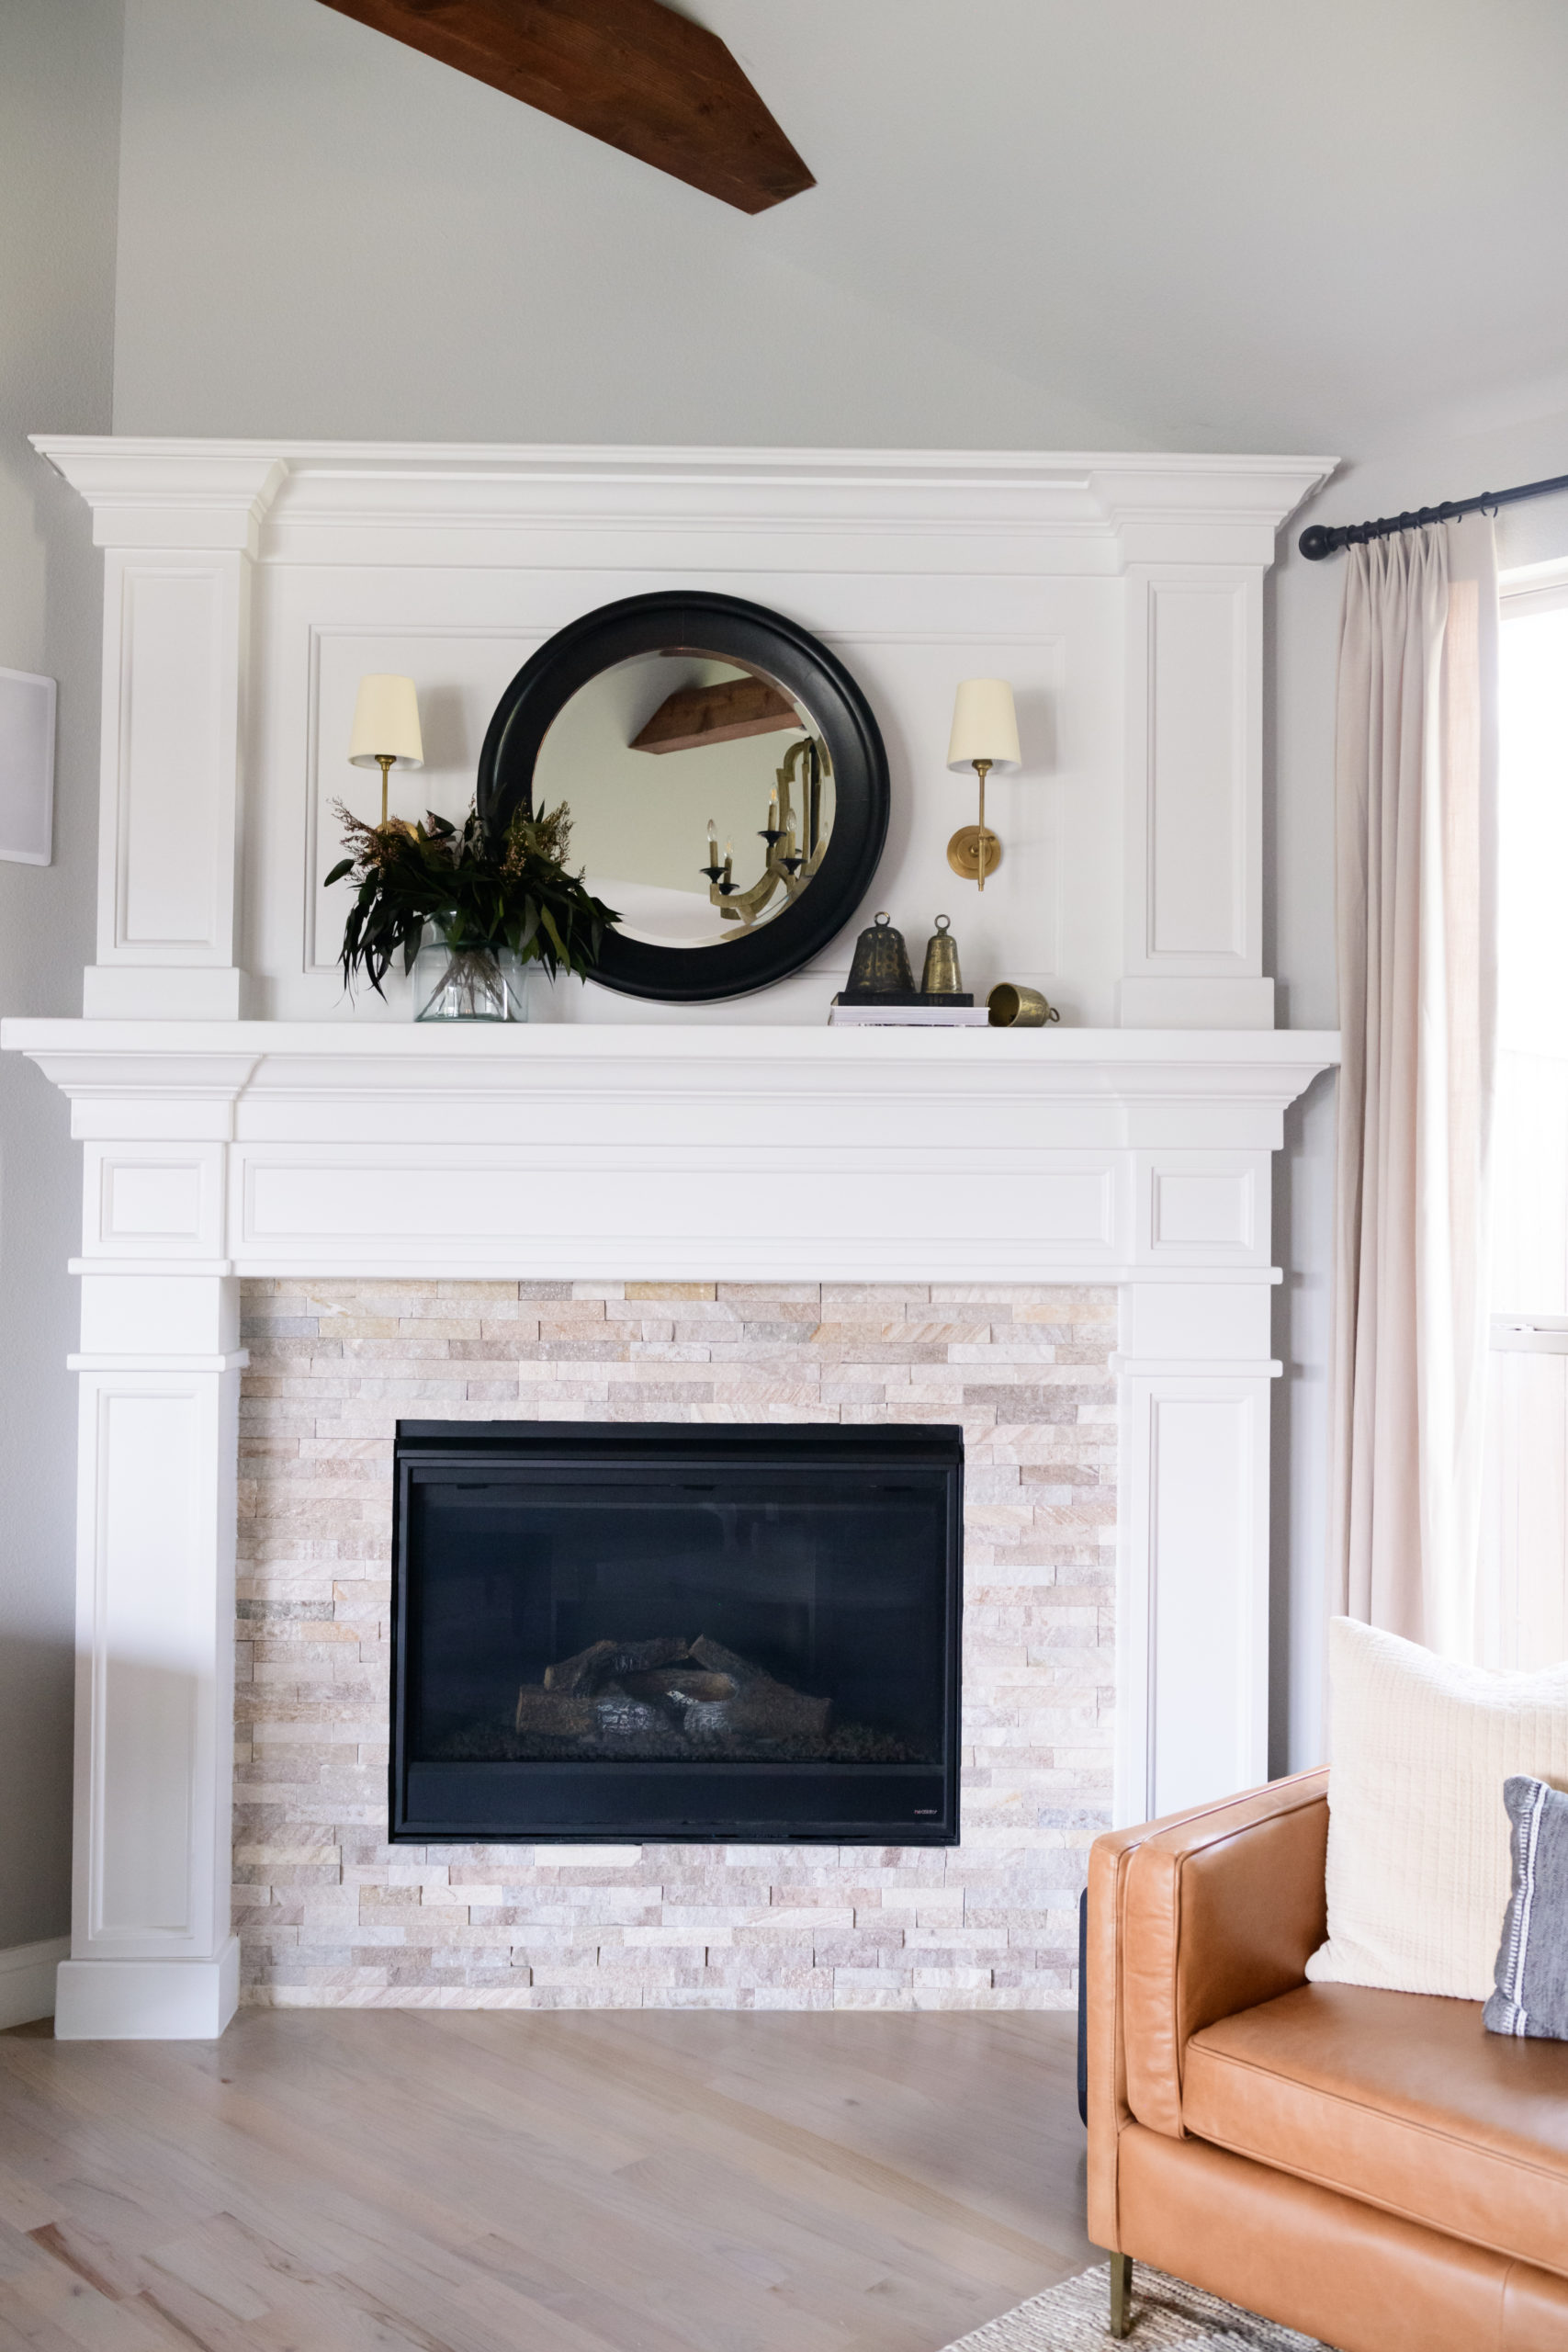 5 ways to style a mirror
mirror above fireplace